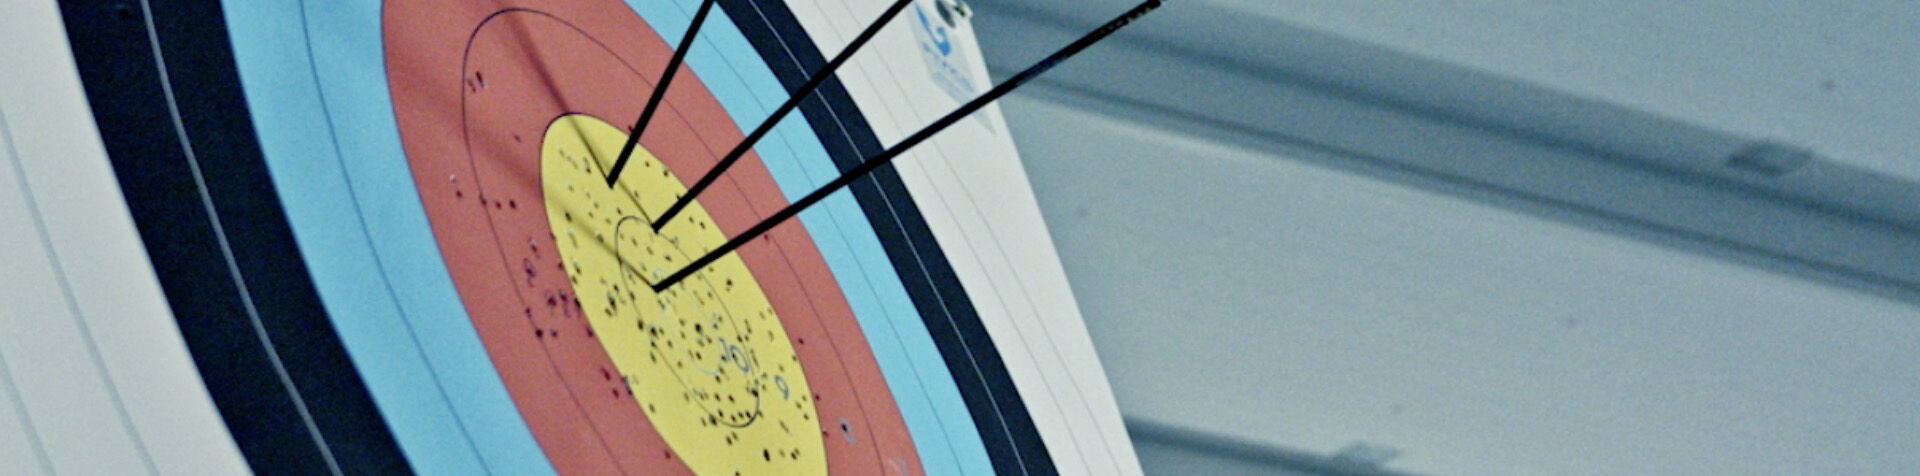 An archery target in close-up with three arrows in the bullseye circle.